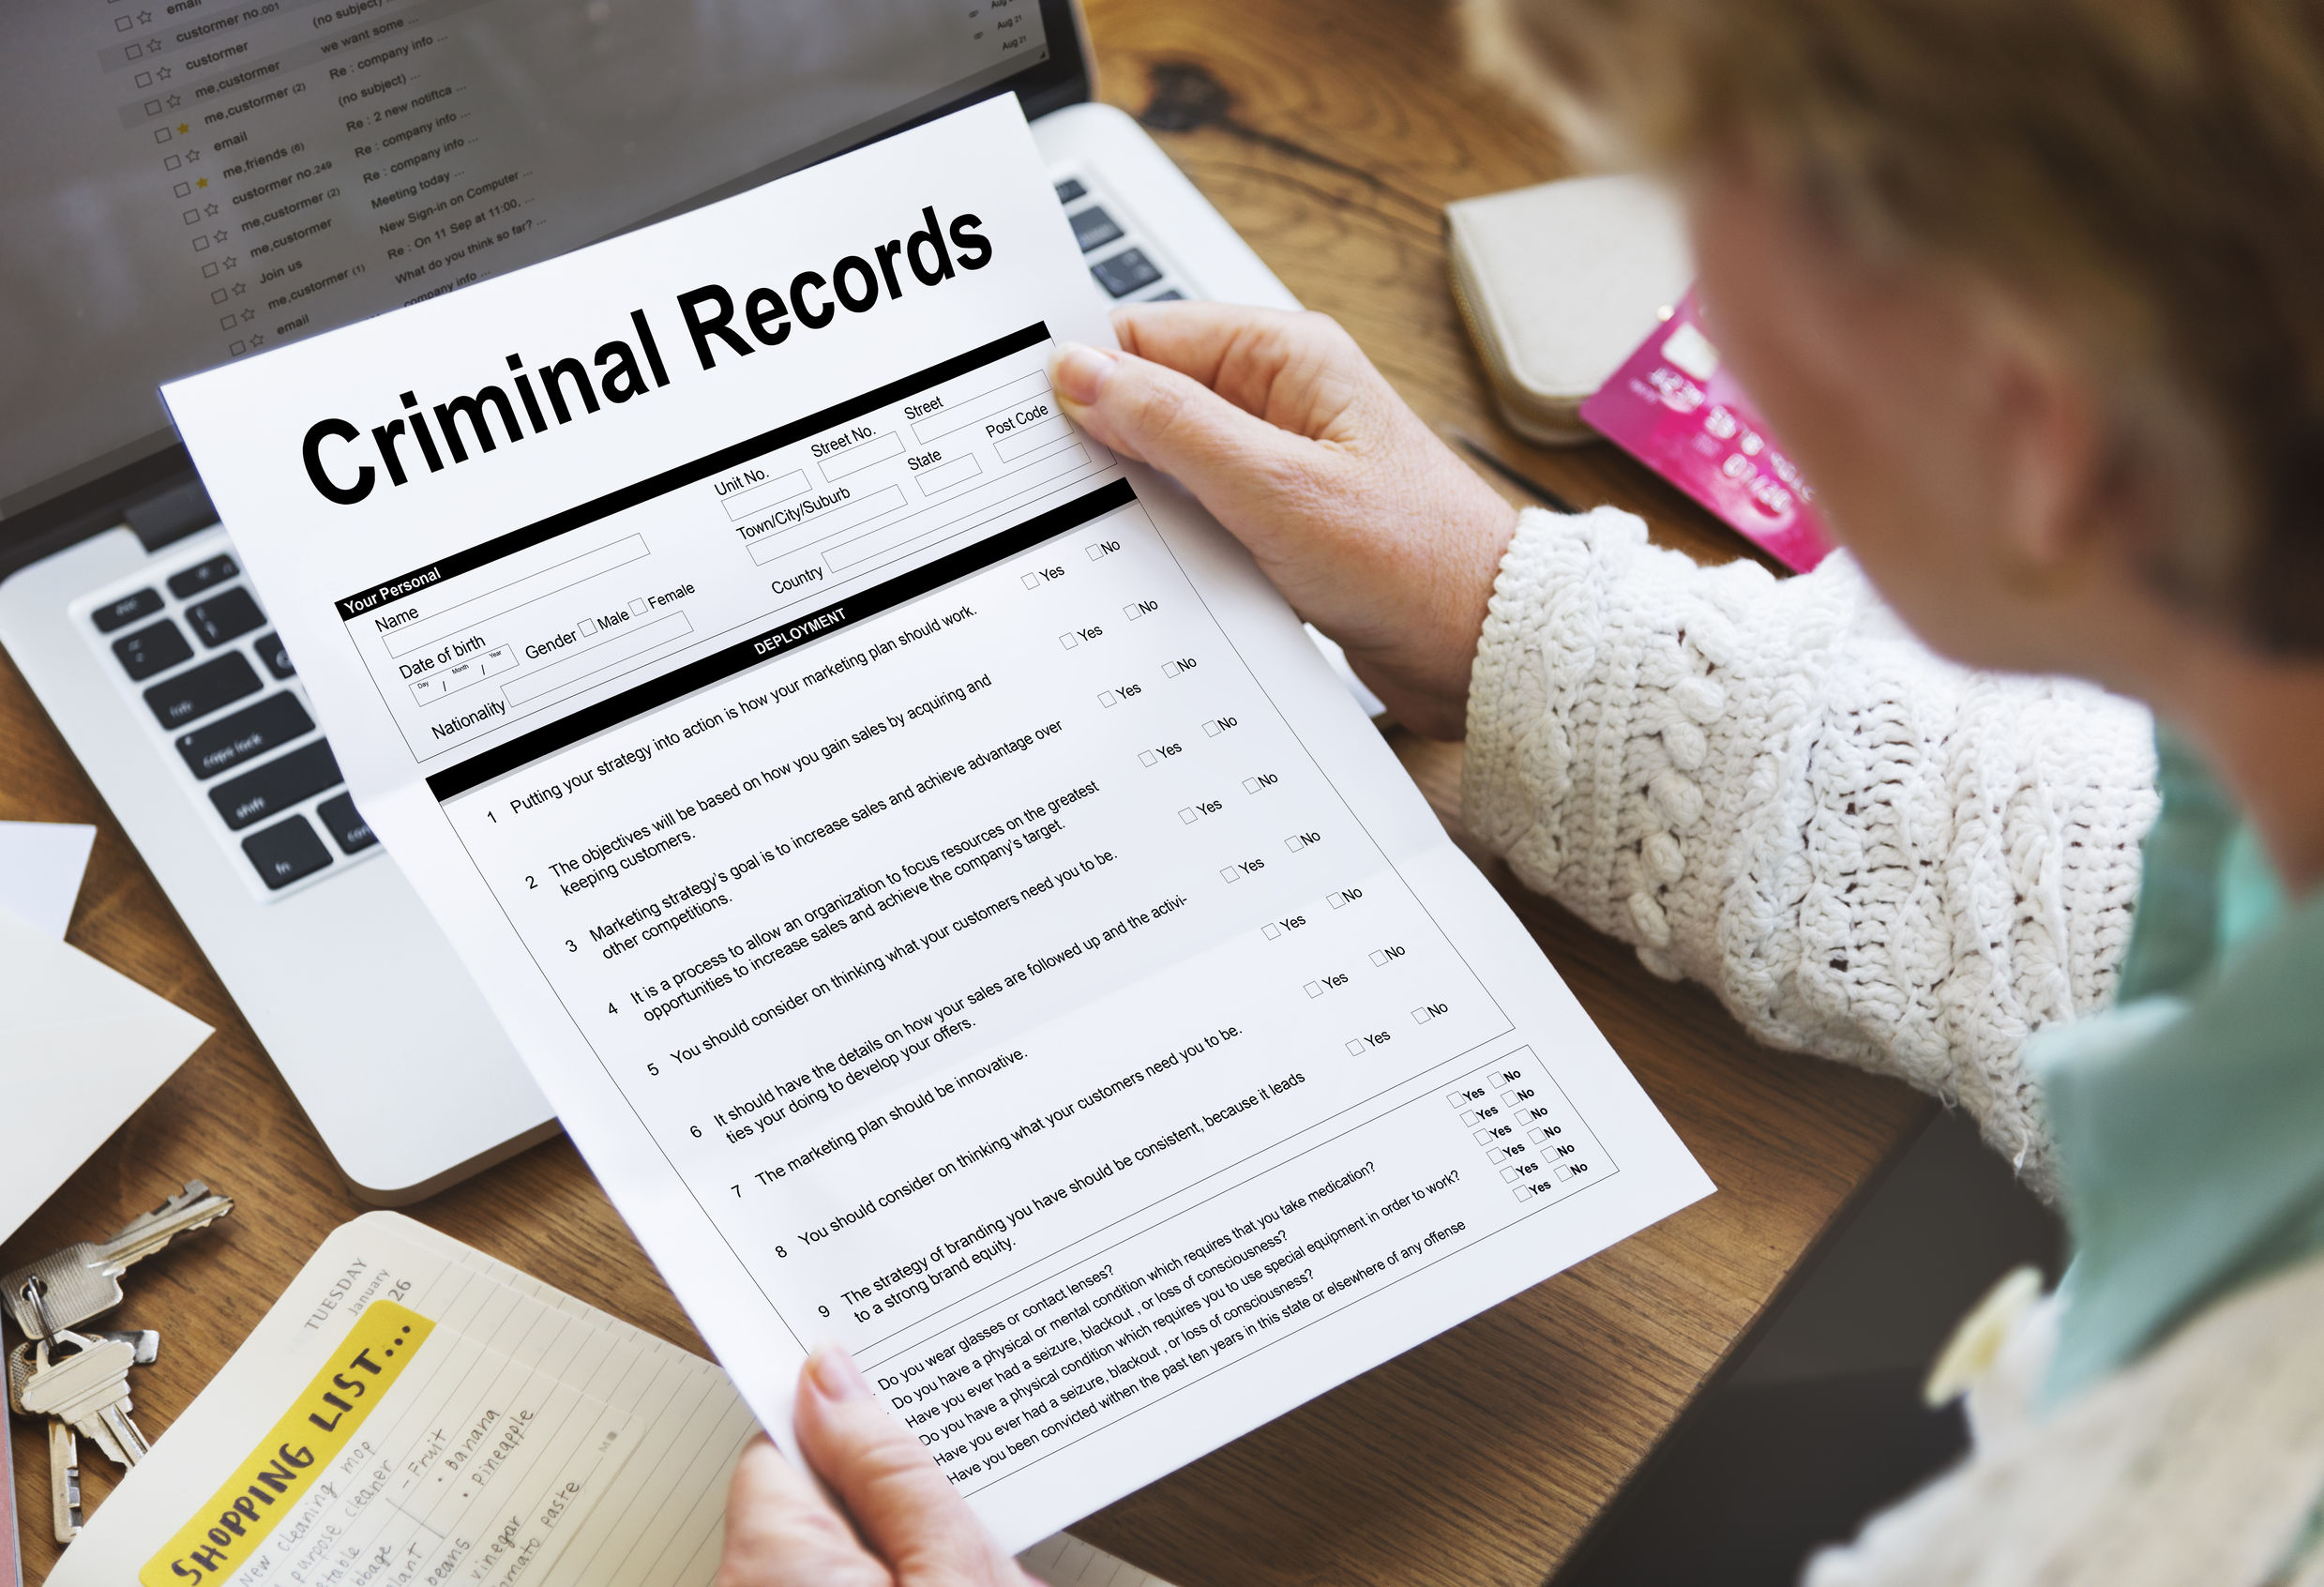 visit america with a criminal record